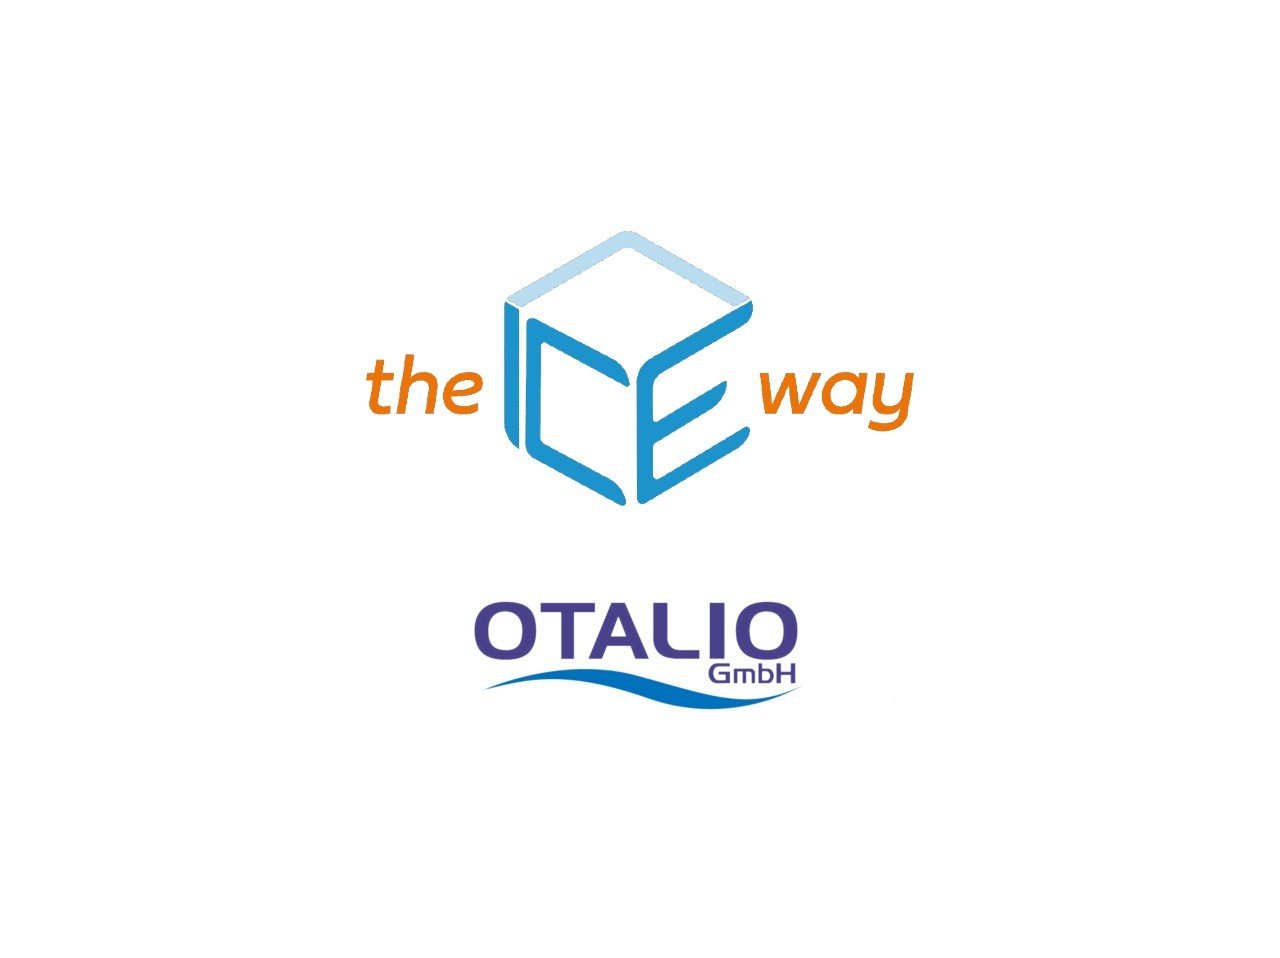 theICEway is Otalio’s official infrastructure implementation partner